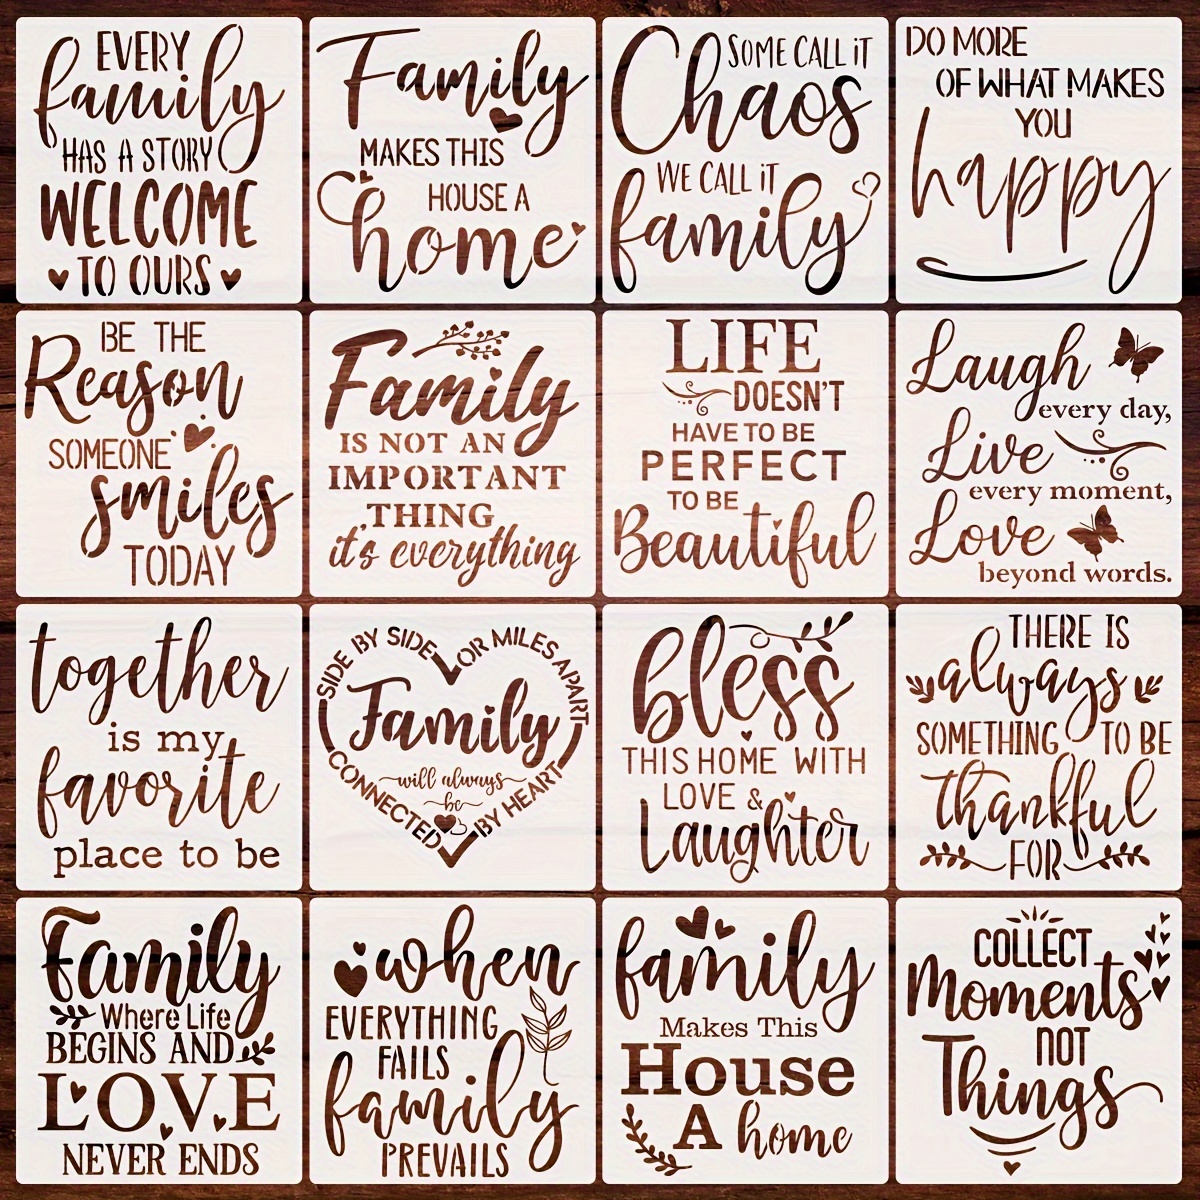 

16 Family Decorative Stencils For Diy Projects - Rubber Material - Reusable And Flexible Home Decor Templates